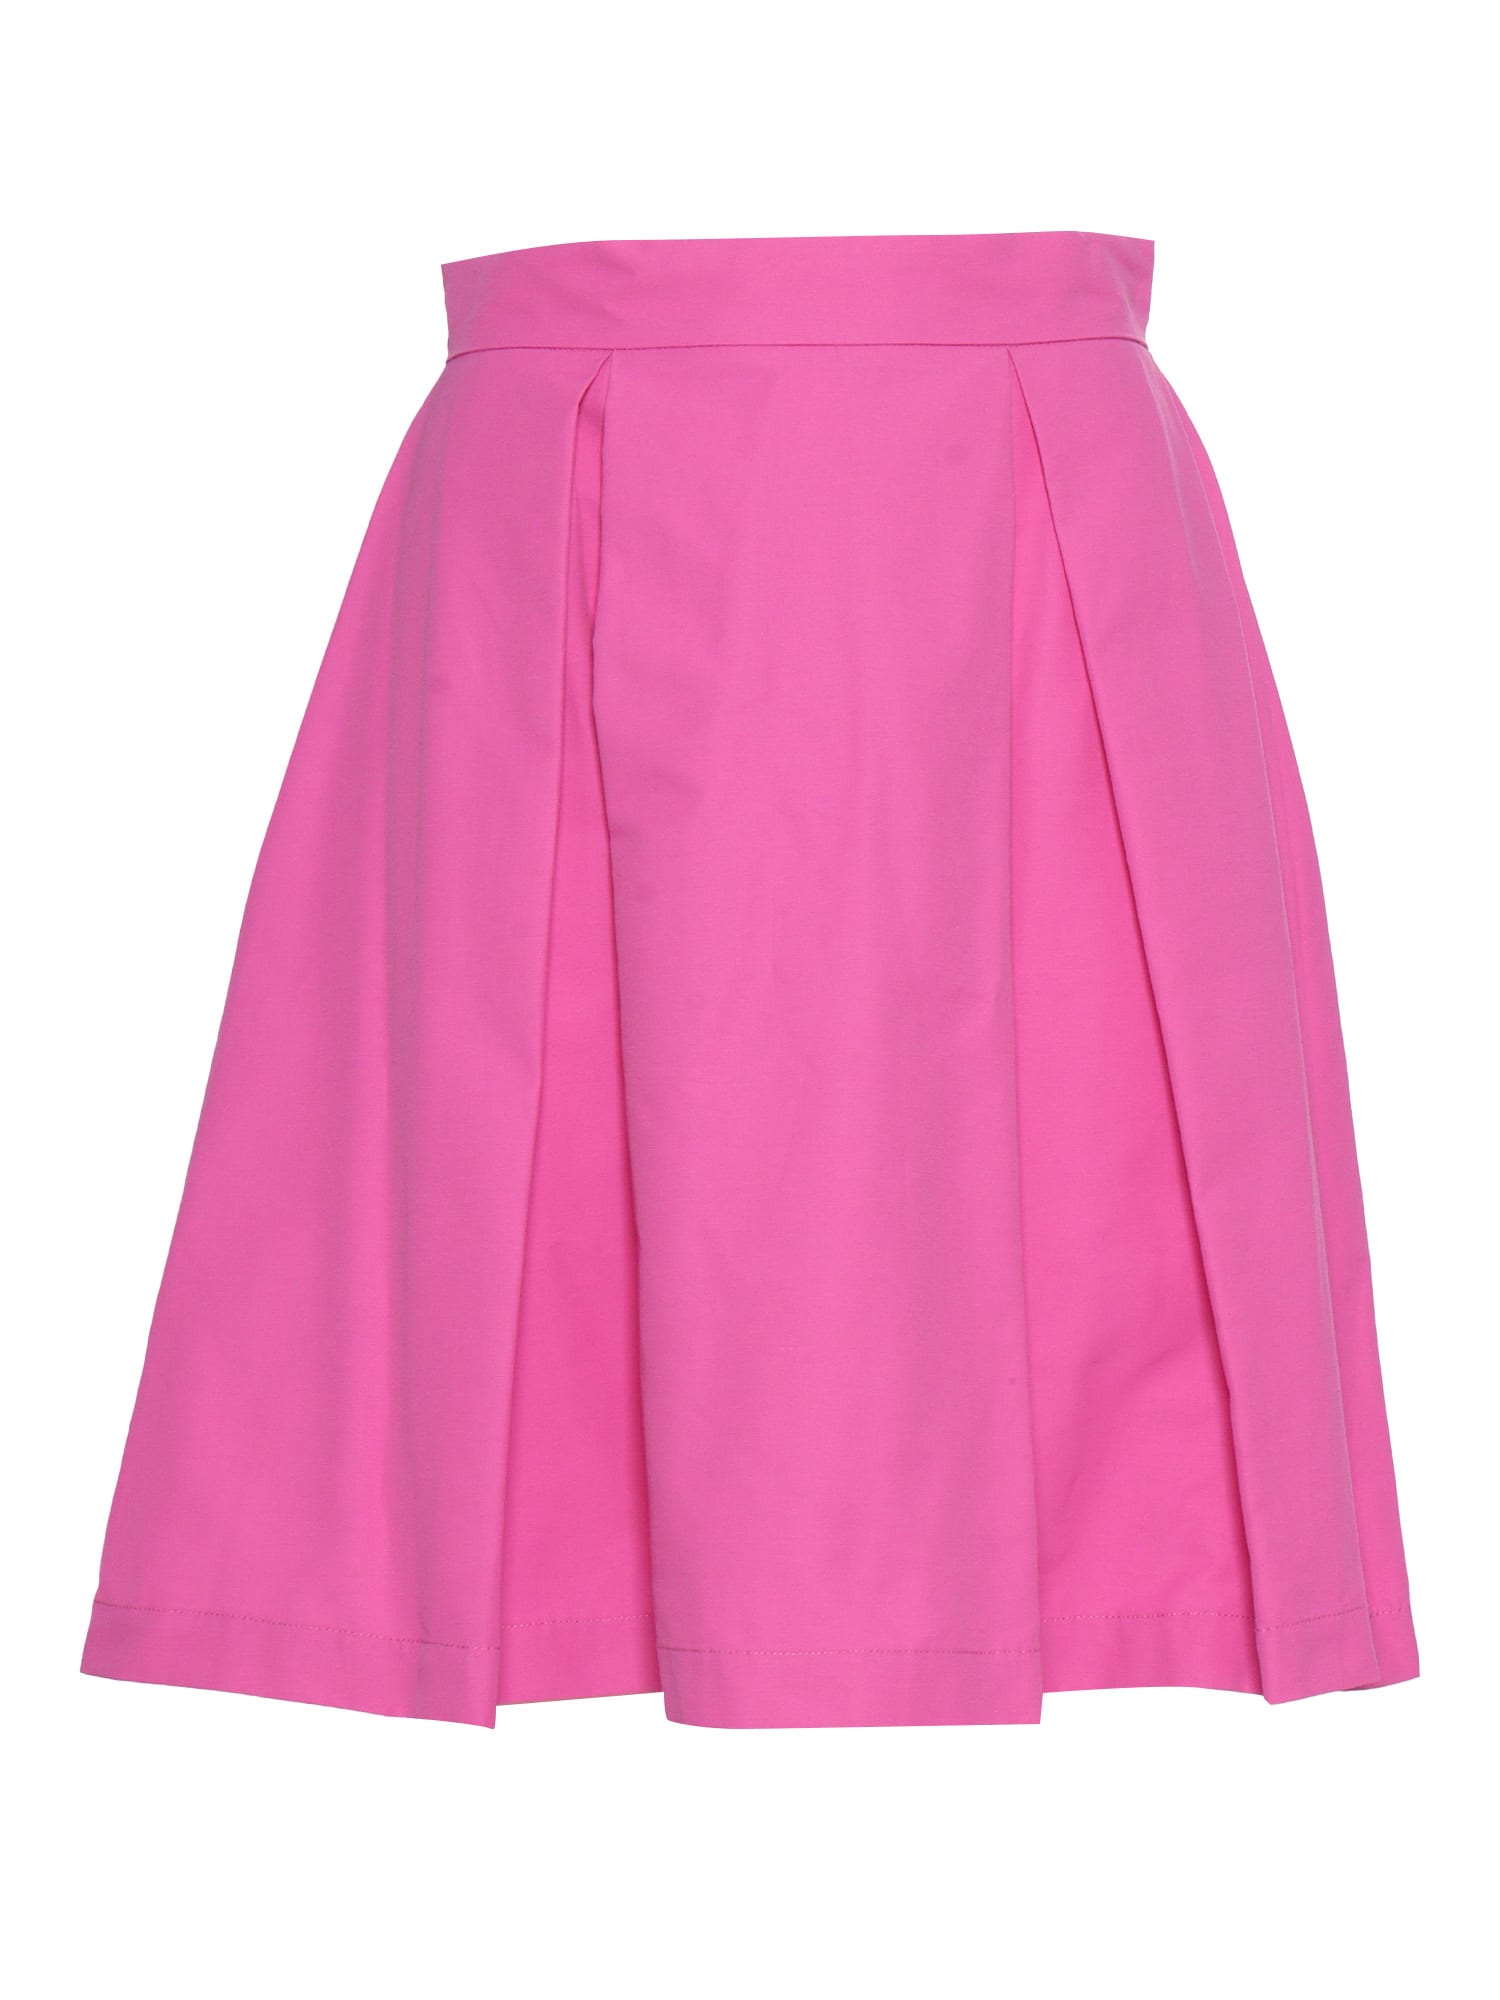 Max&amp;co. Kids' Pink Flared Skirt